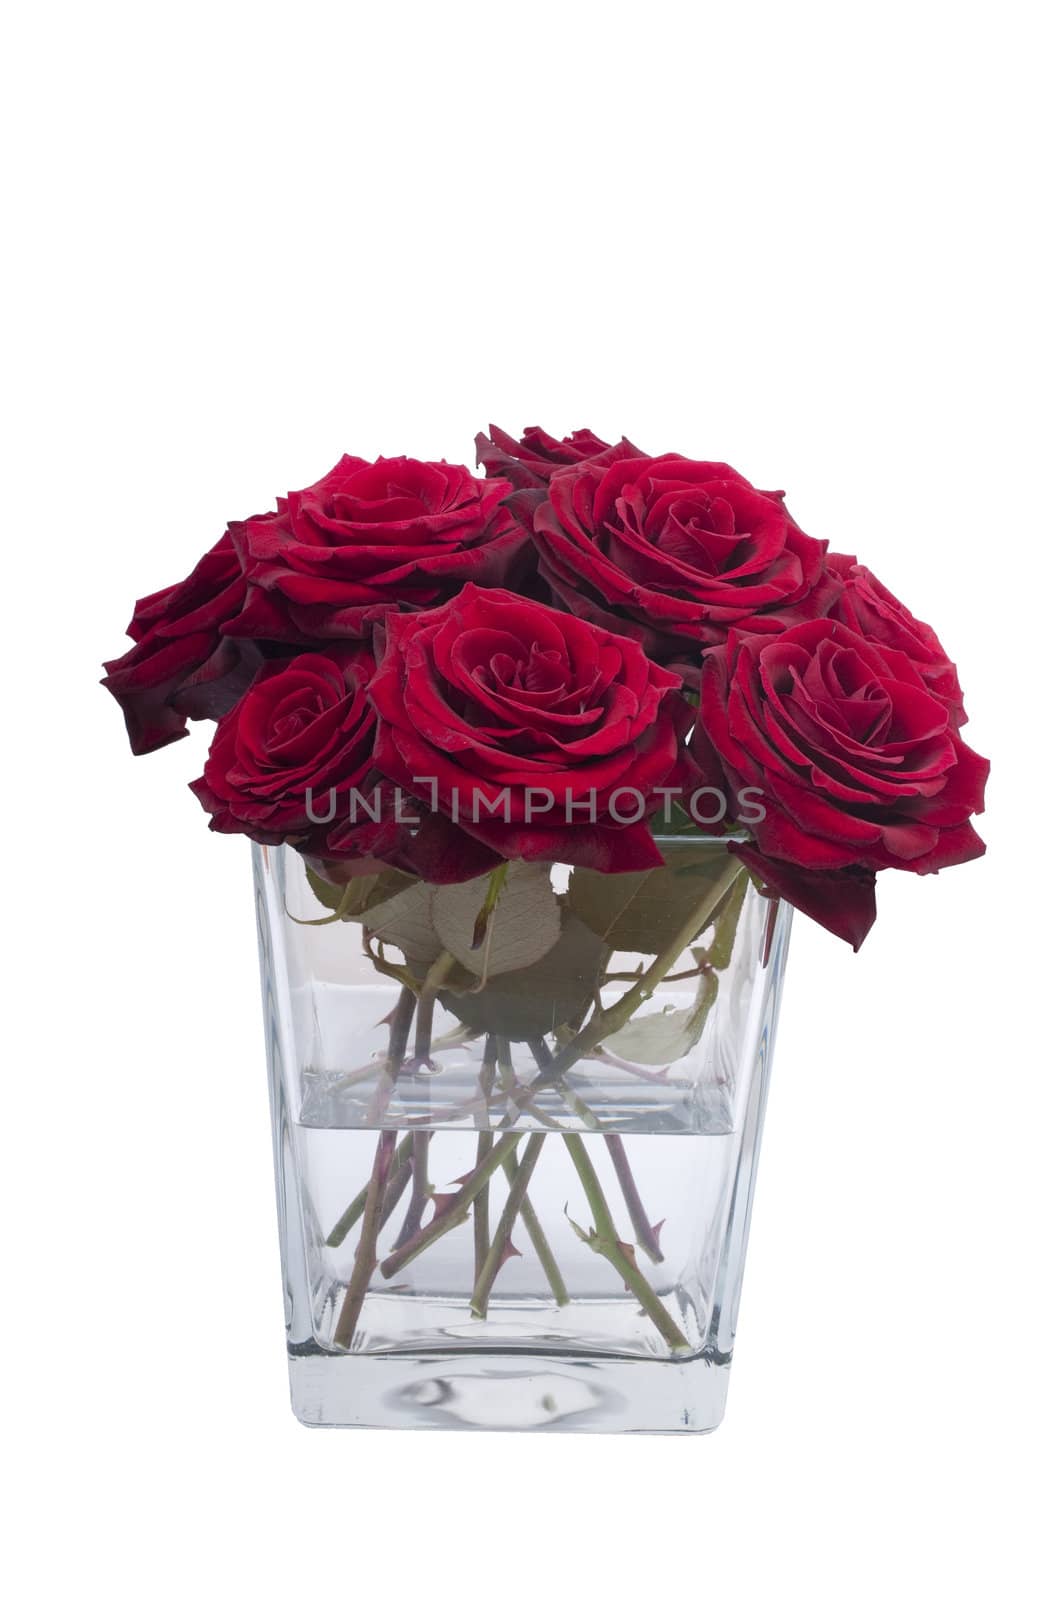 Bunch of red rose flowers in a small vase by bigmagic